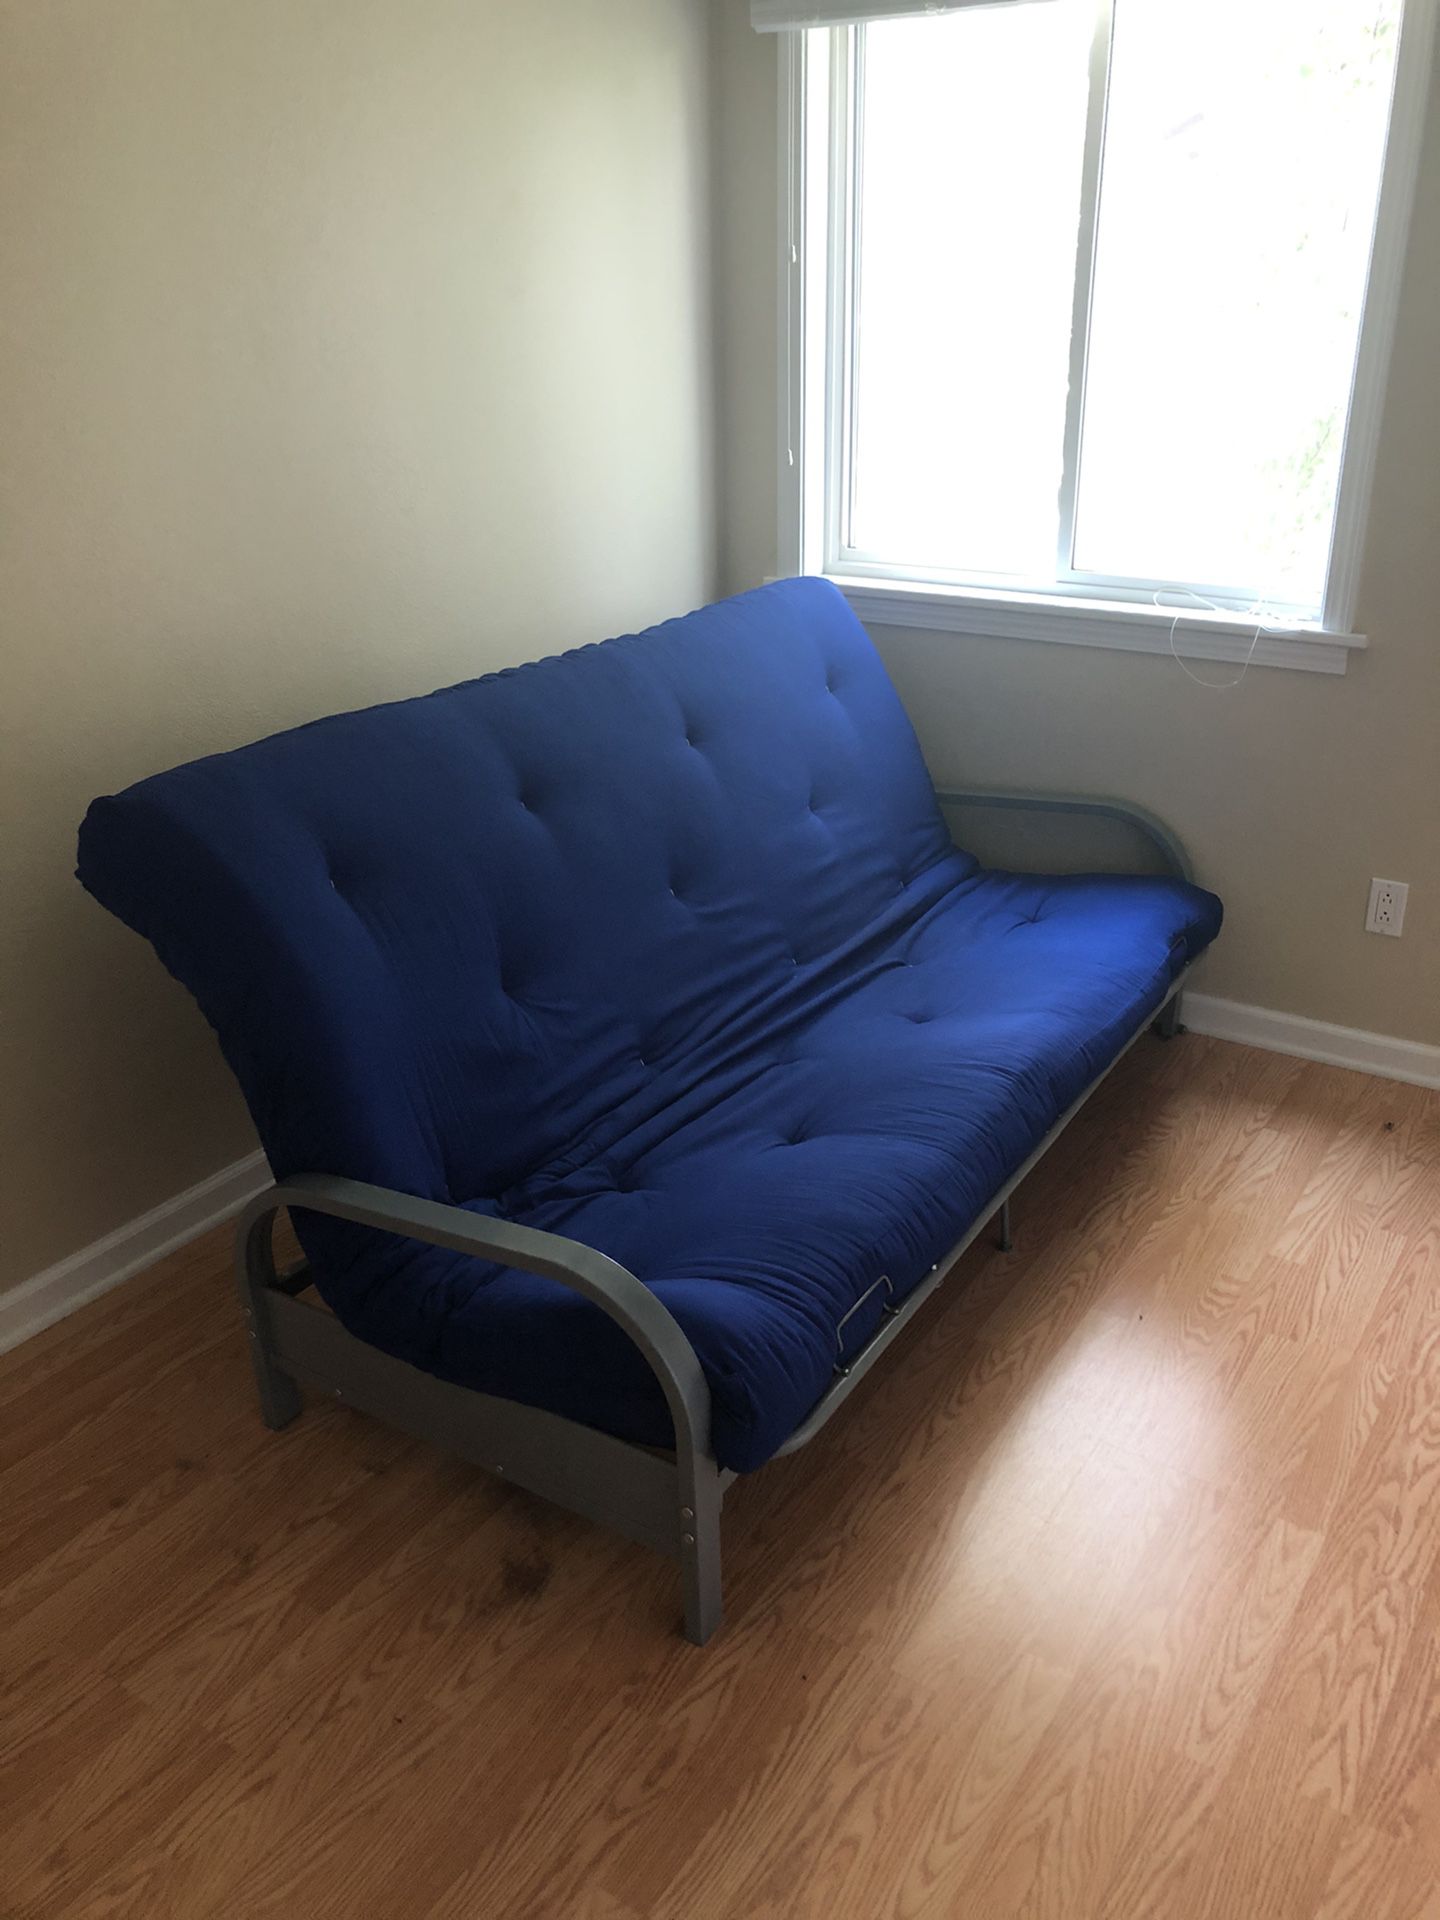 GREAT FUTON for sale 40$